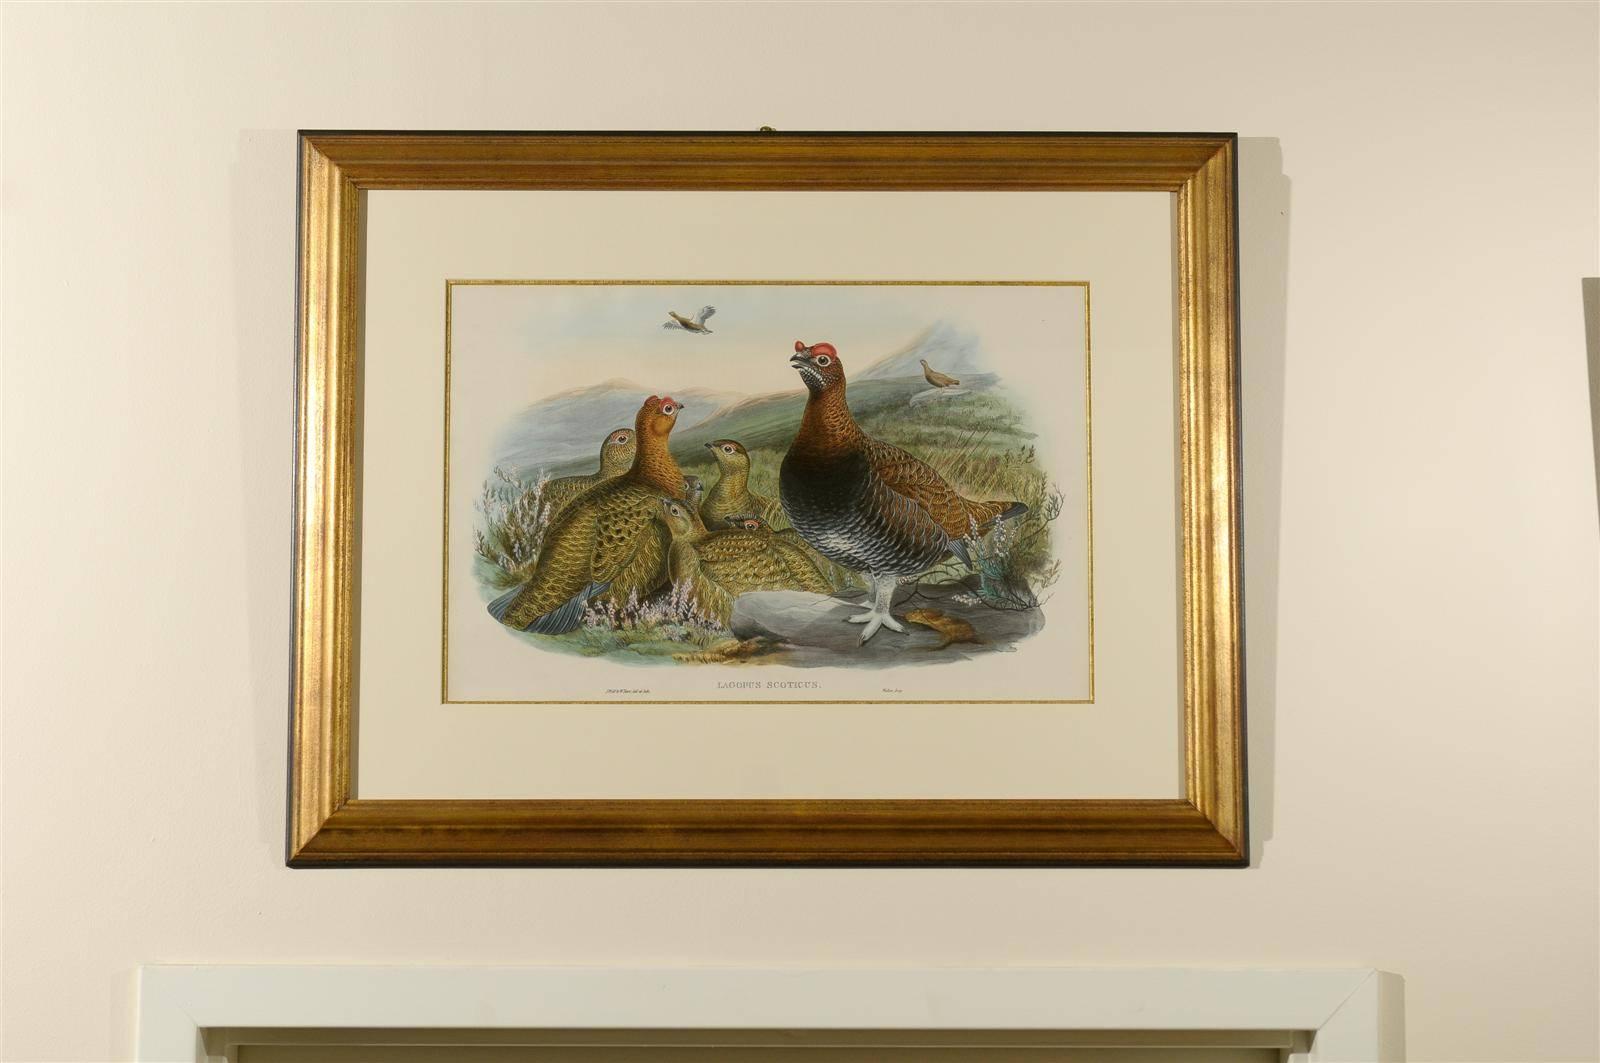 Lagopus scoticus.
The red grouse is a medium sized bird in the grouse family which is found in Heather Moorland in Great Britain and Ireland. Professionally framed by Fred Reed Picture Framing.